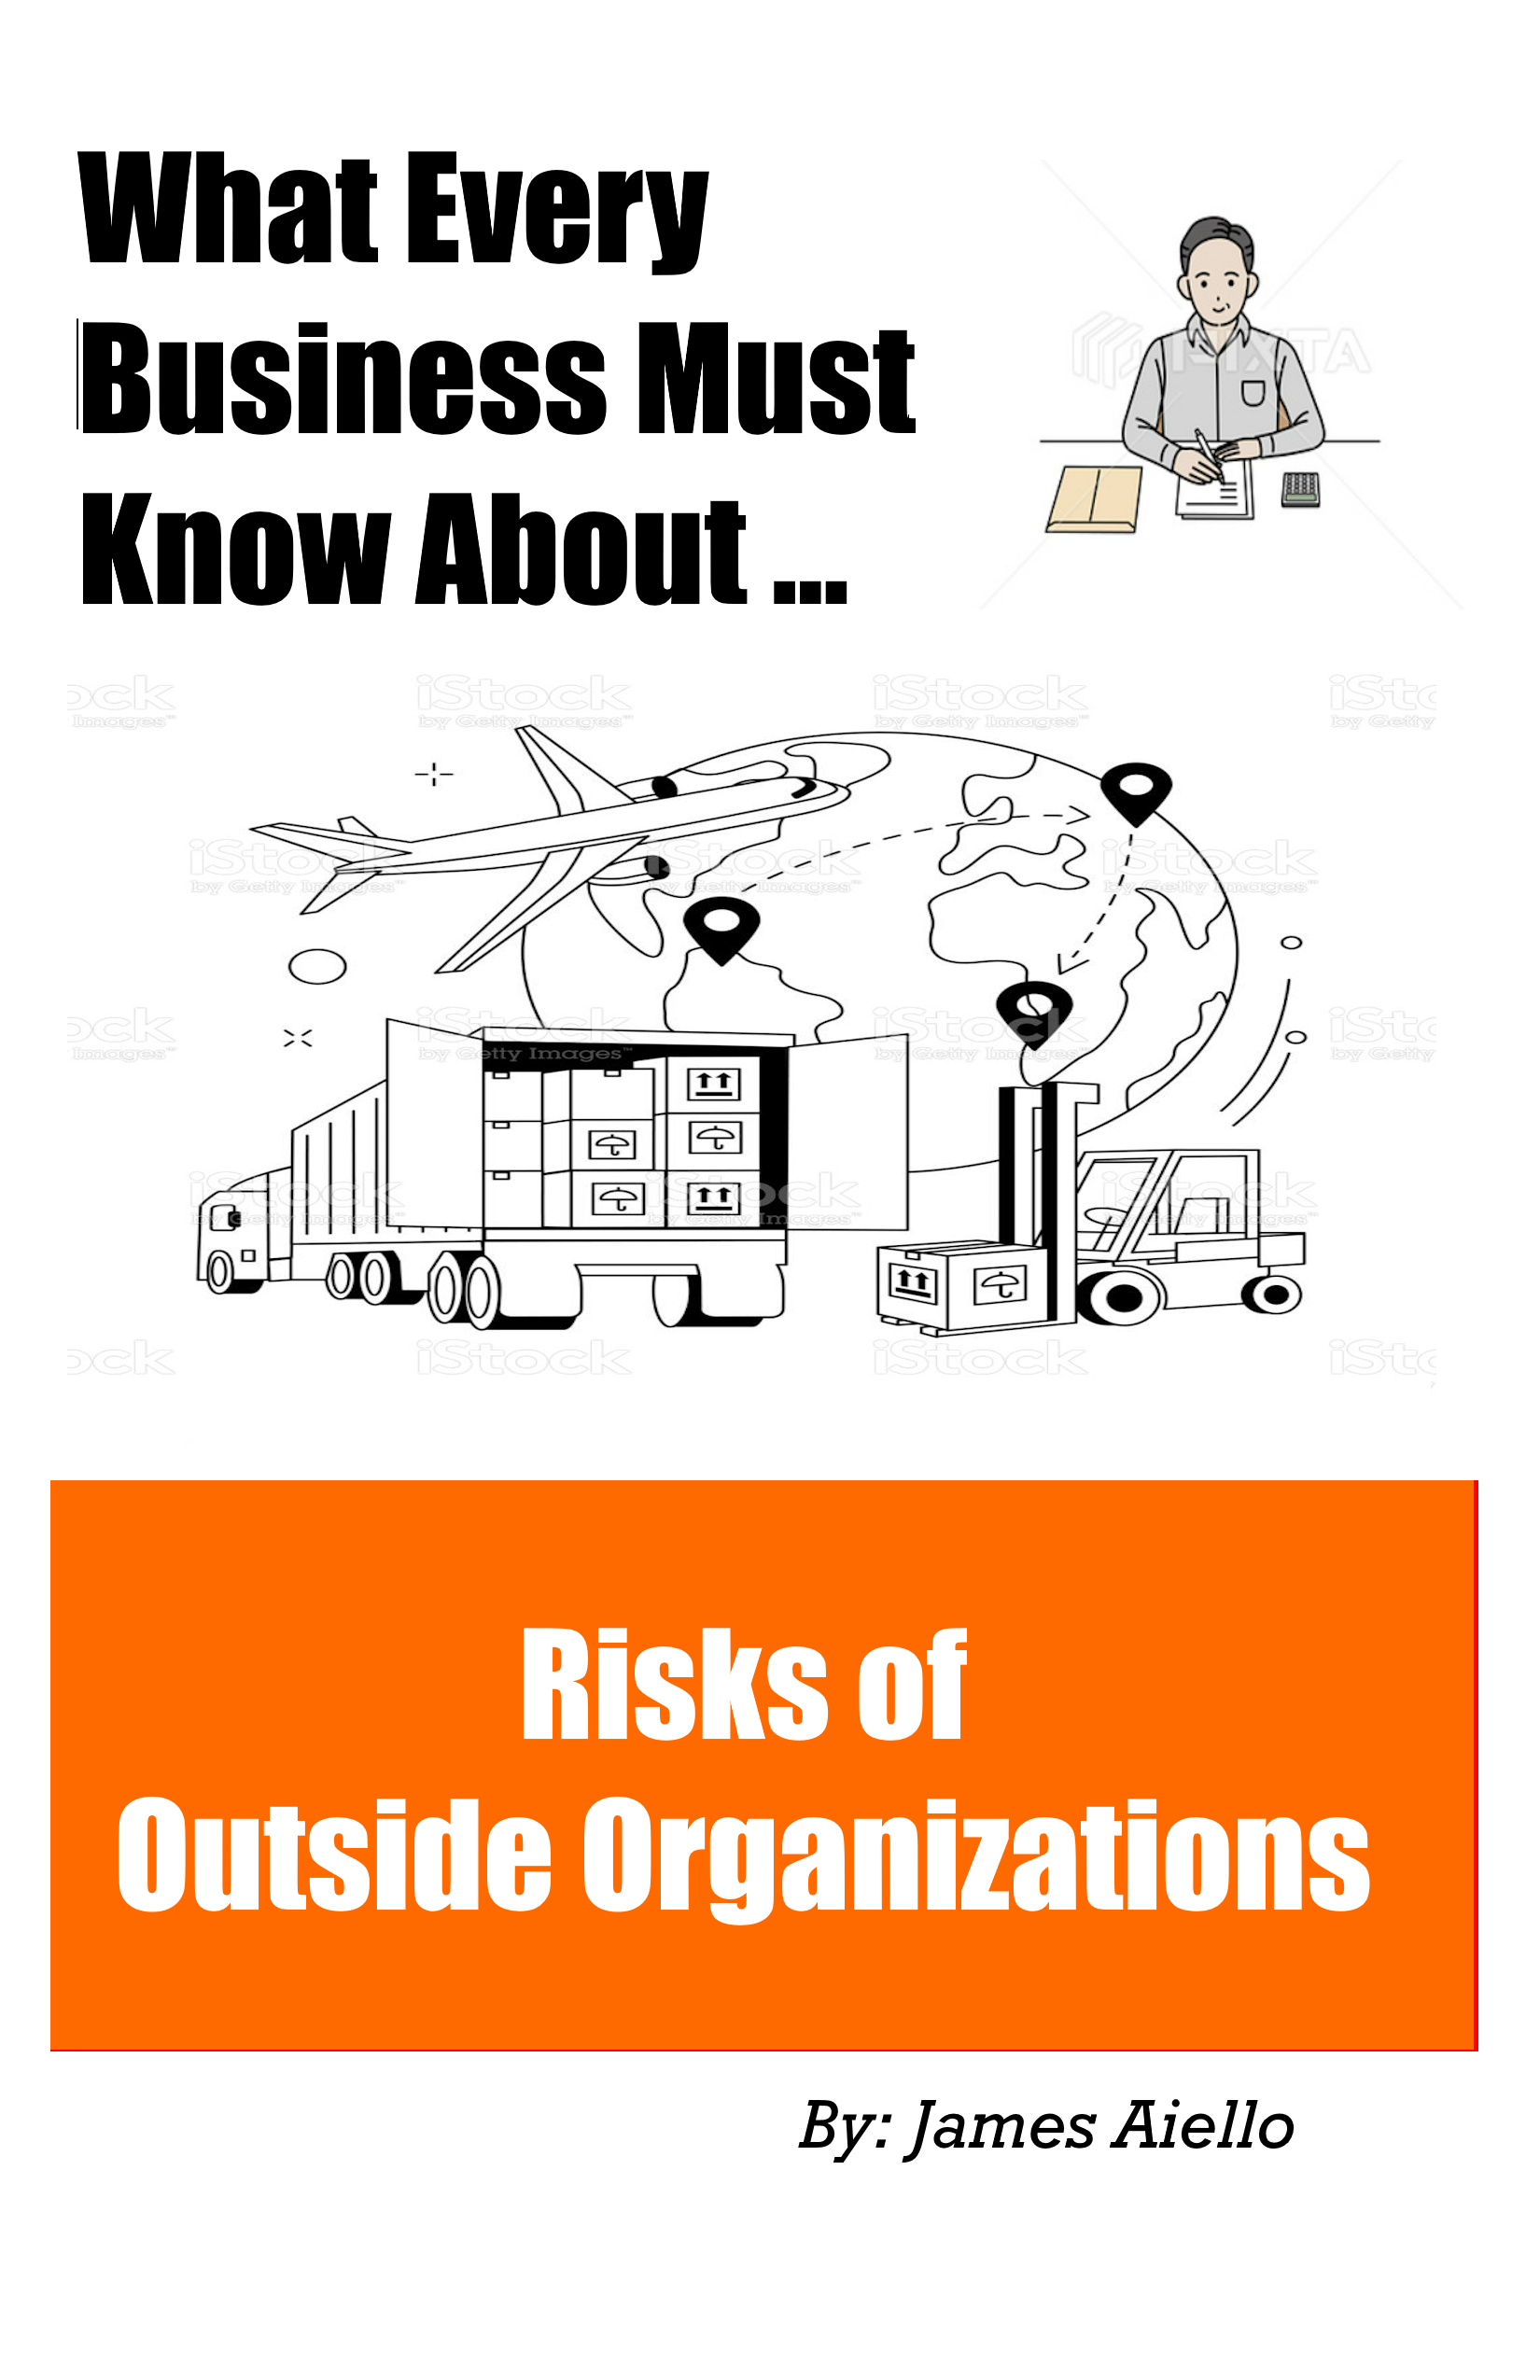 Risks of Outside Organiztions